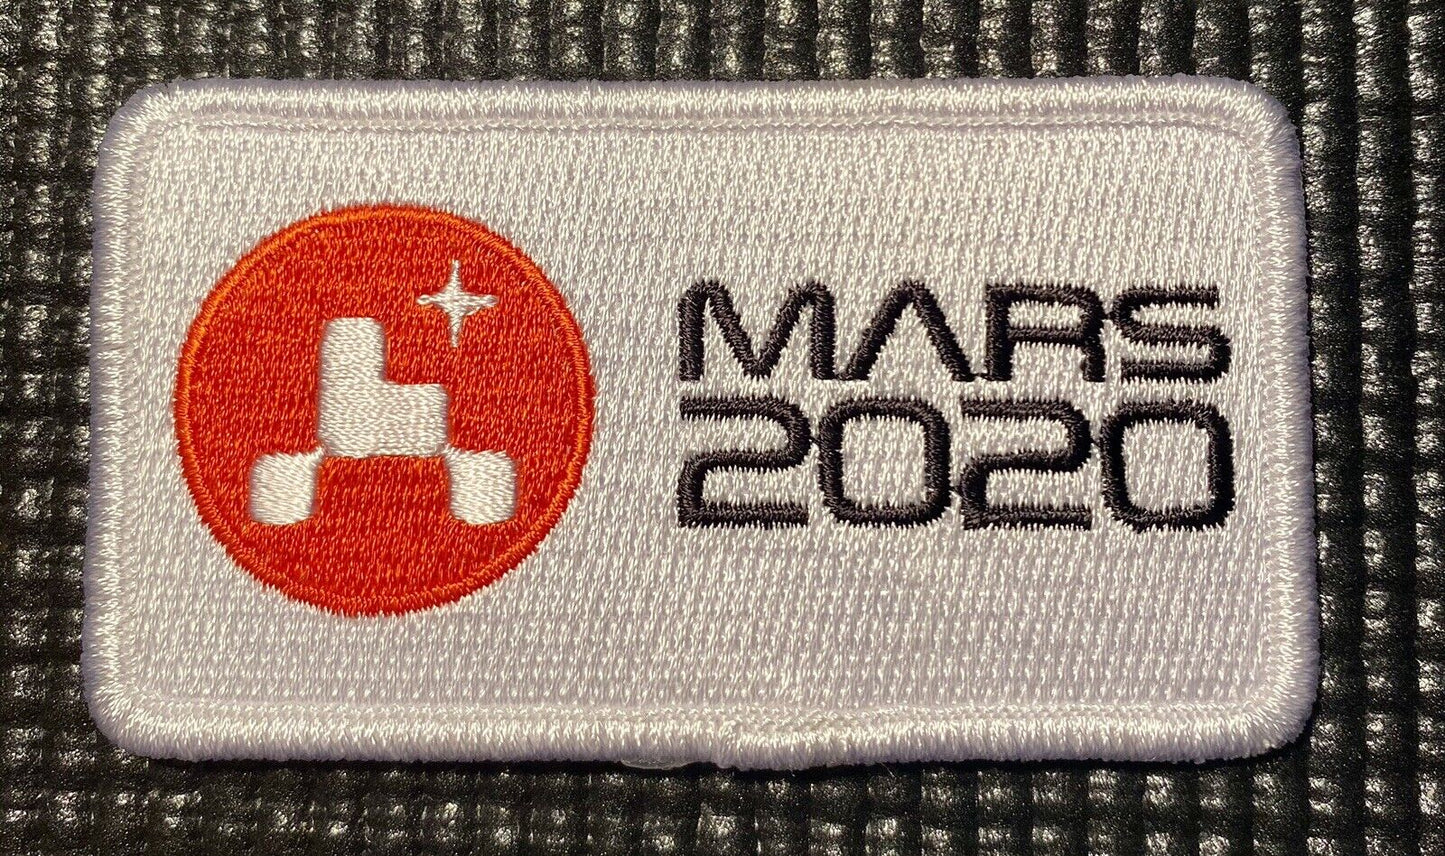 NASA JPL - MARS 2020 PERSEVERANCE ROVER - MISSION PATCH - 3.5” x 2”